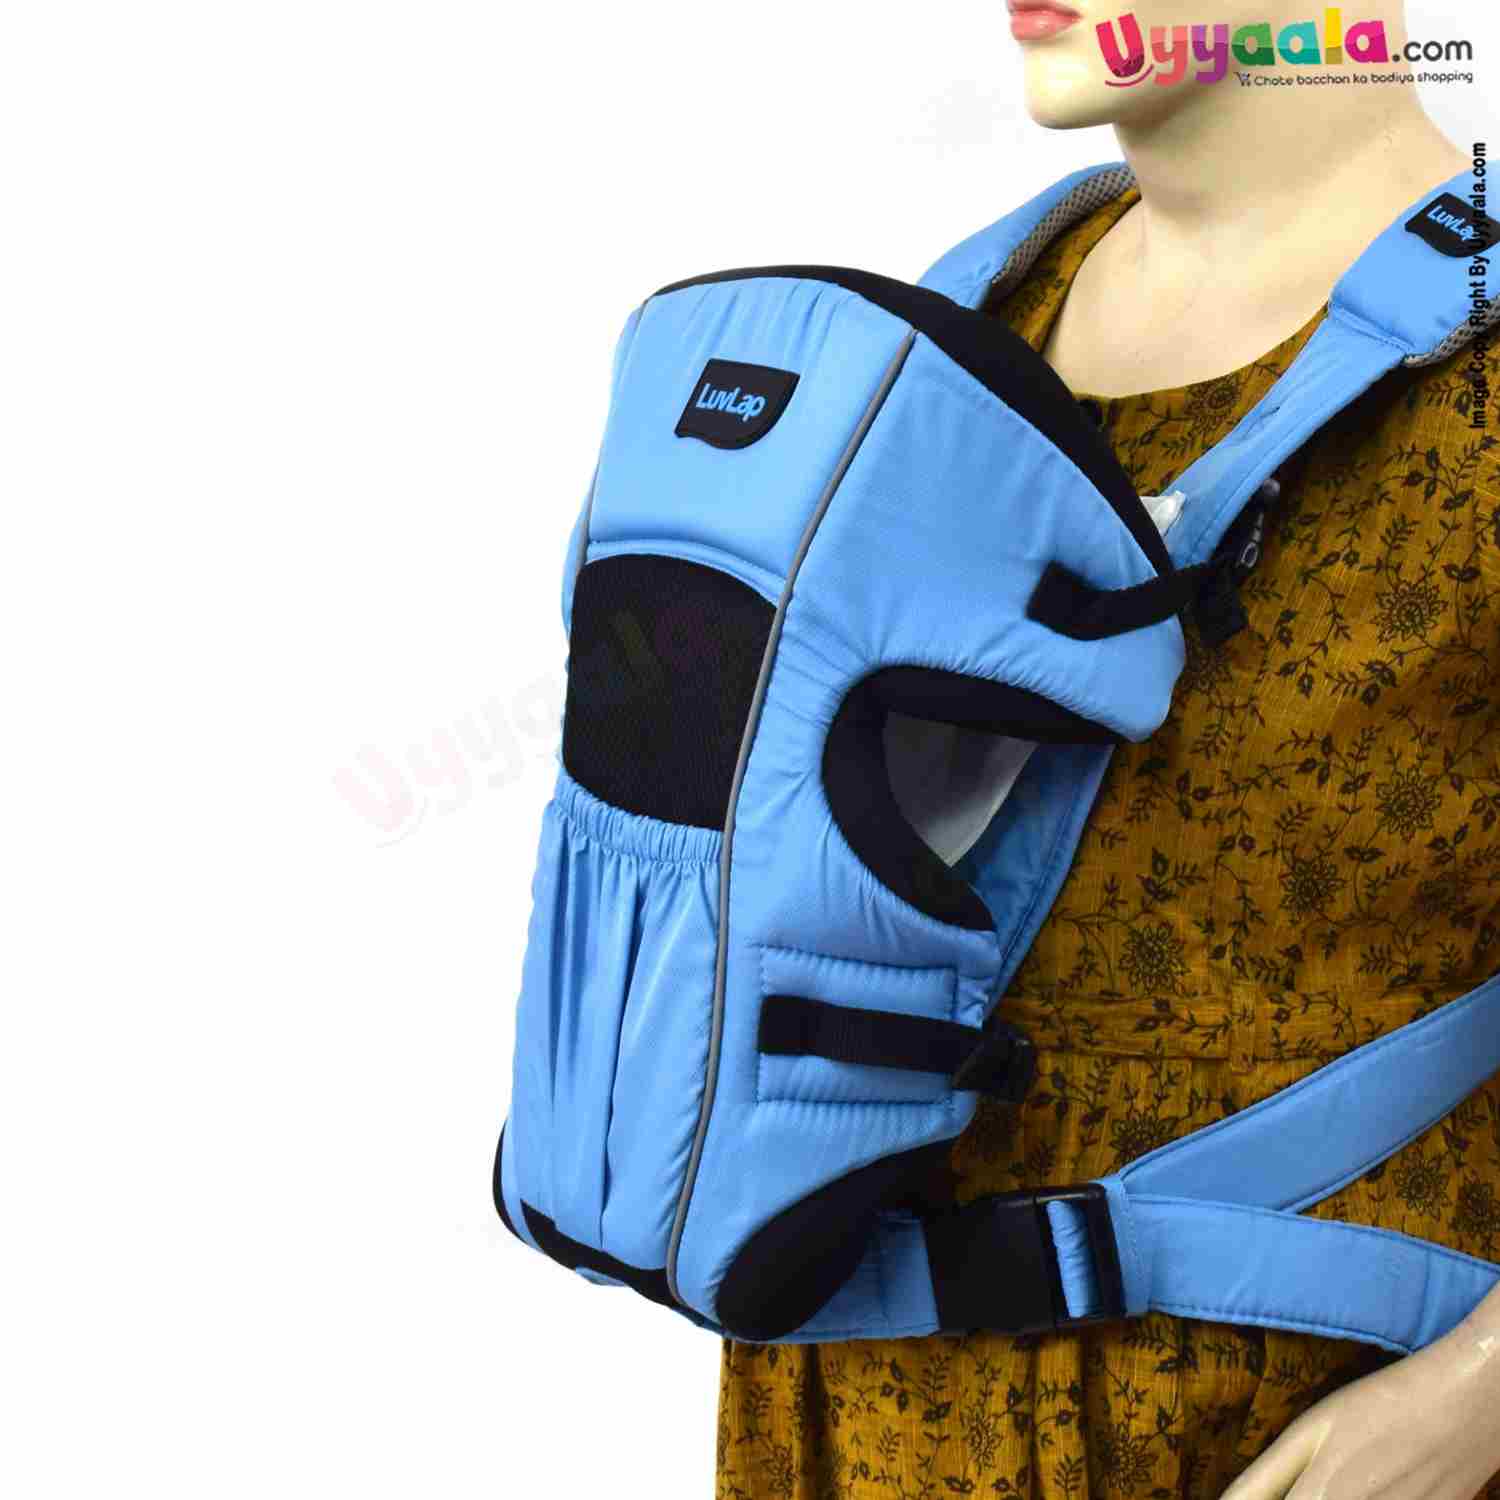 LuvLap Baby Carrier with 2 in 1 Carry Positions, for 6 to 24m Baby, Max Weight Up to 12 Kgs, Size(40*23cm)- Black & Blue